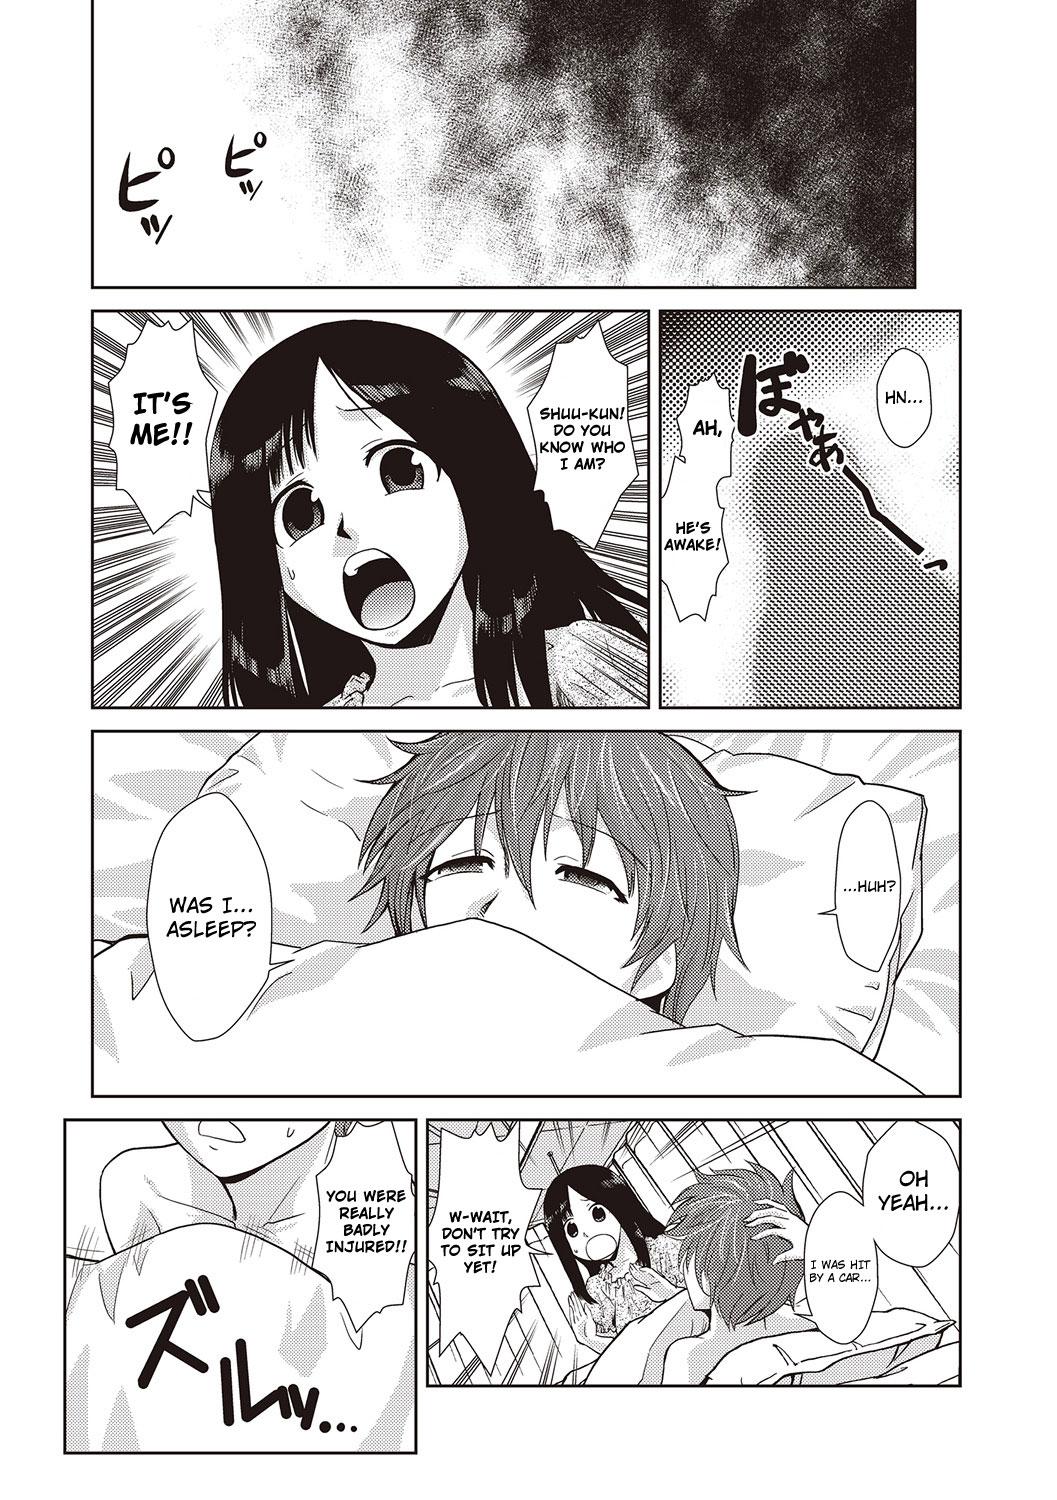 Fuck Her Hard Hakase no Renai Kaizouron | A Professors Theory on Love and Sex Reassignment Surgery Asia - Page 5